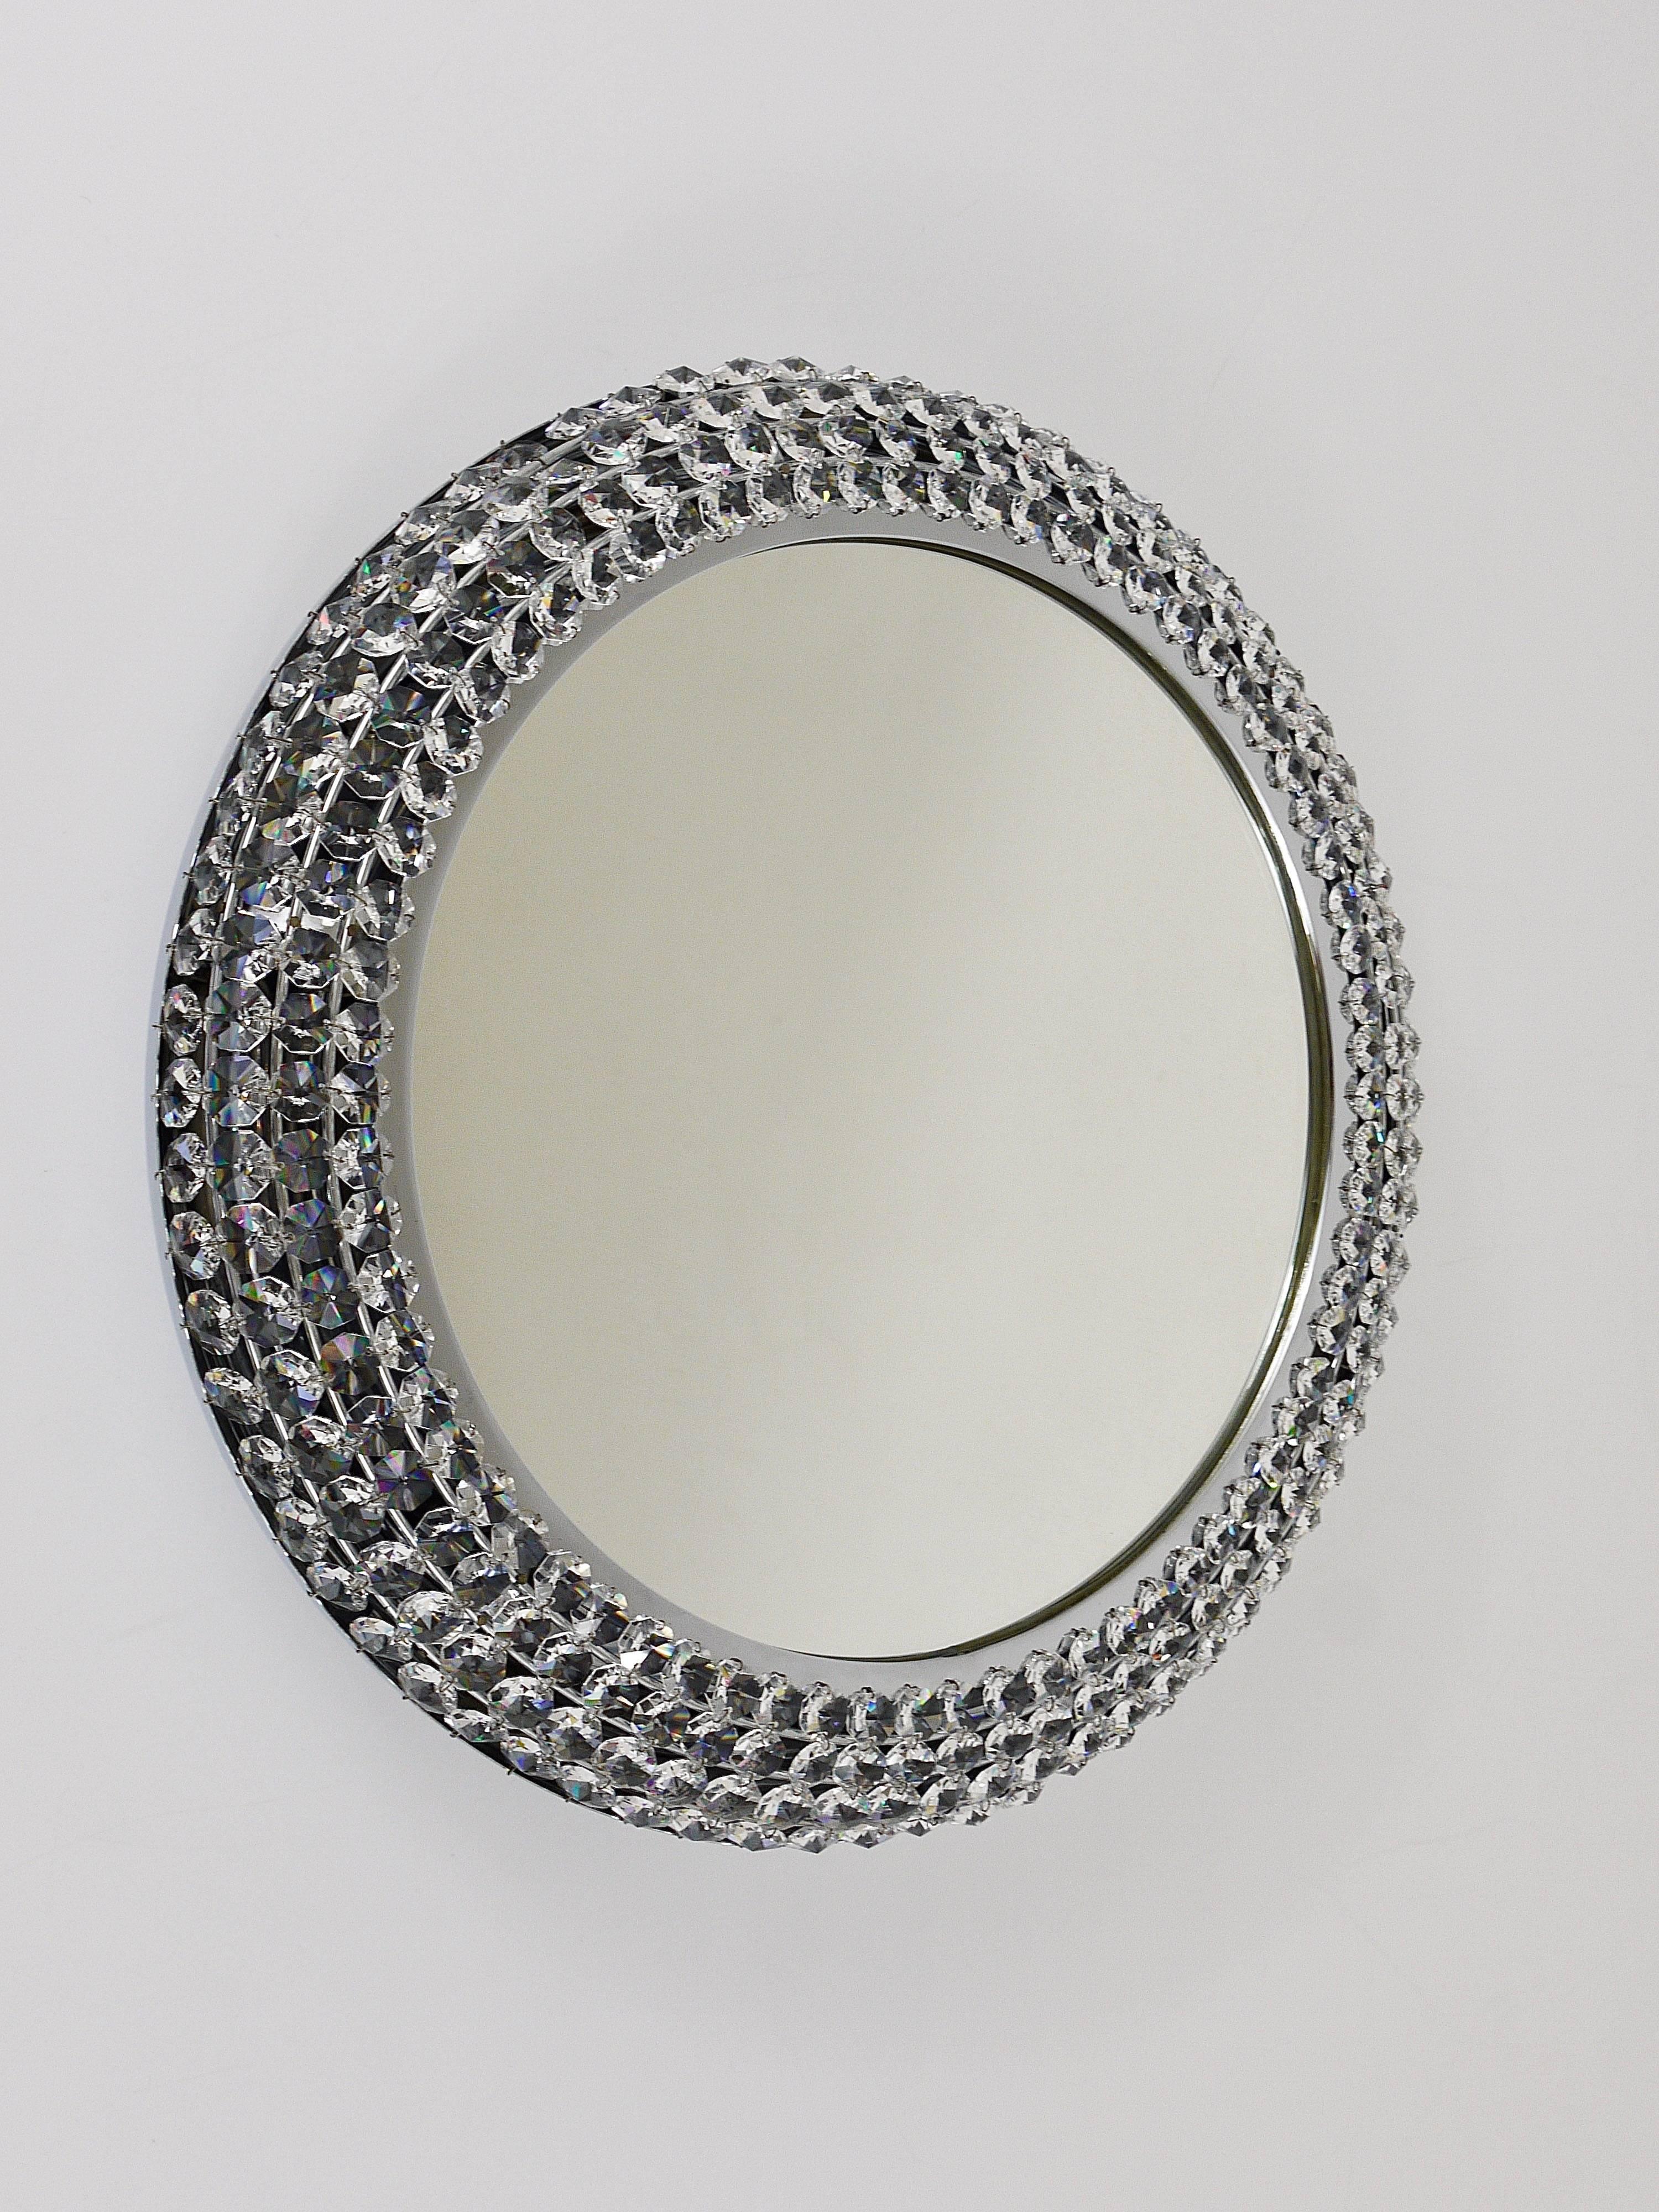 Round Chromed Crystal Backlit Wall Mirror, Austria, 1960s For Sale 2